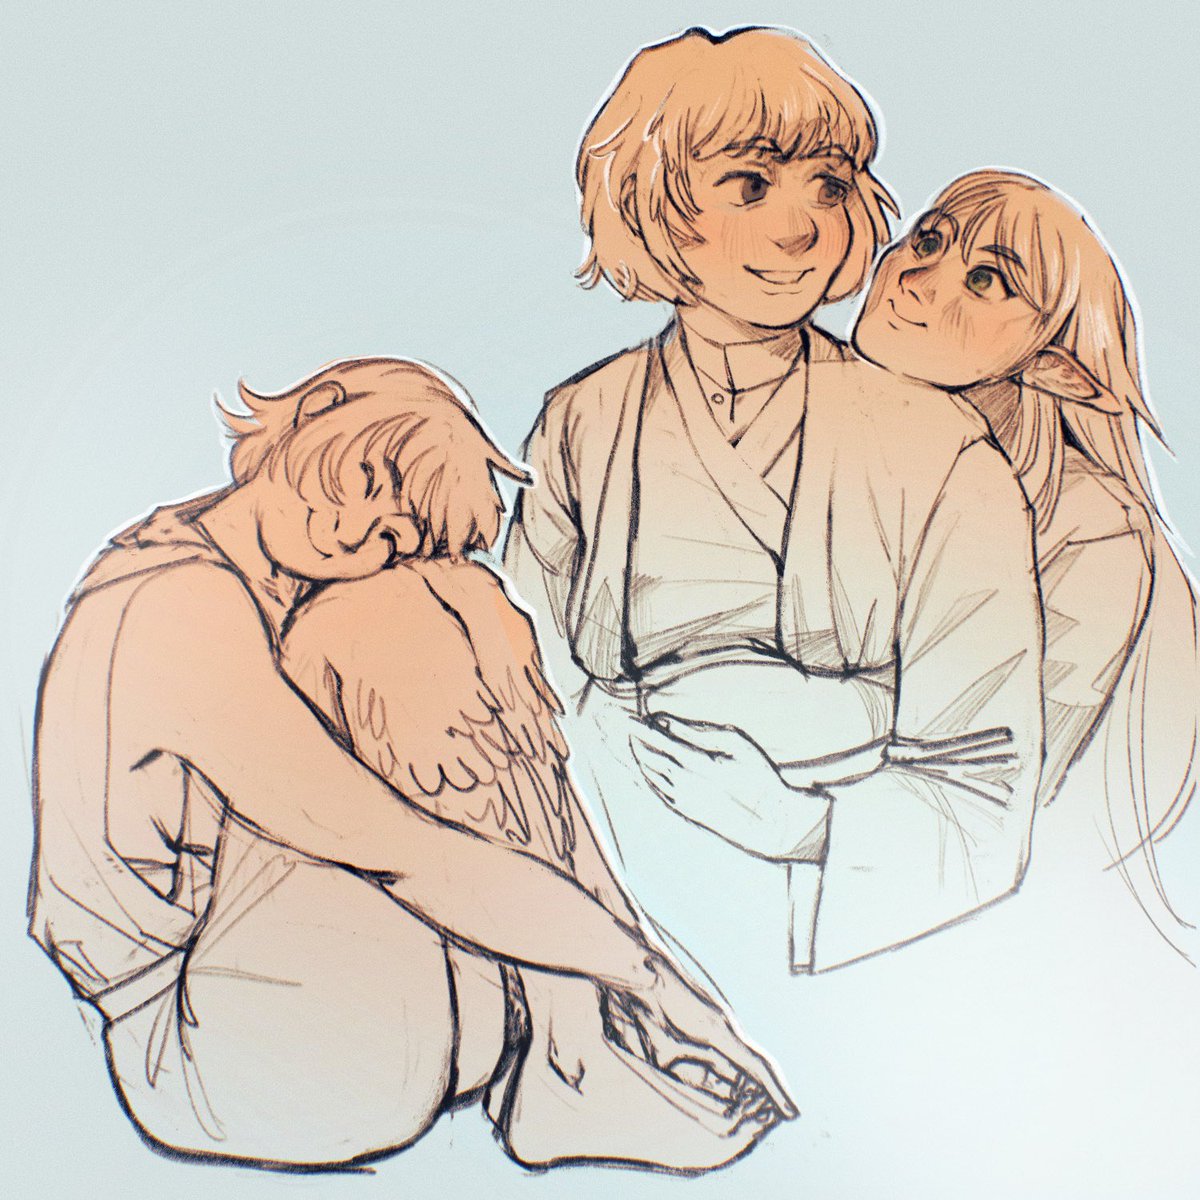 no thoughts just falin smiling #farcille #dungeonmeshi